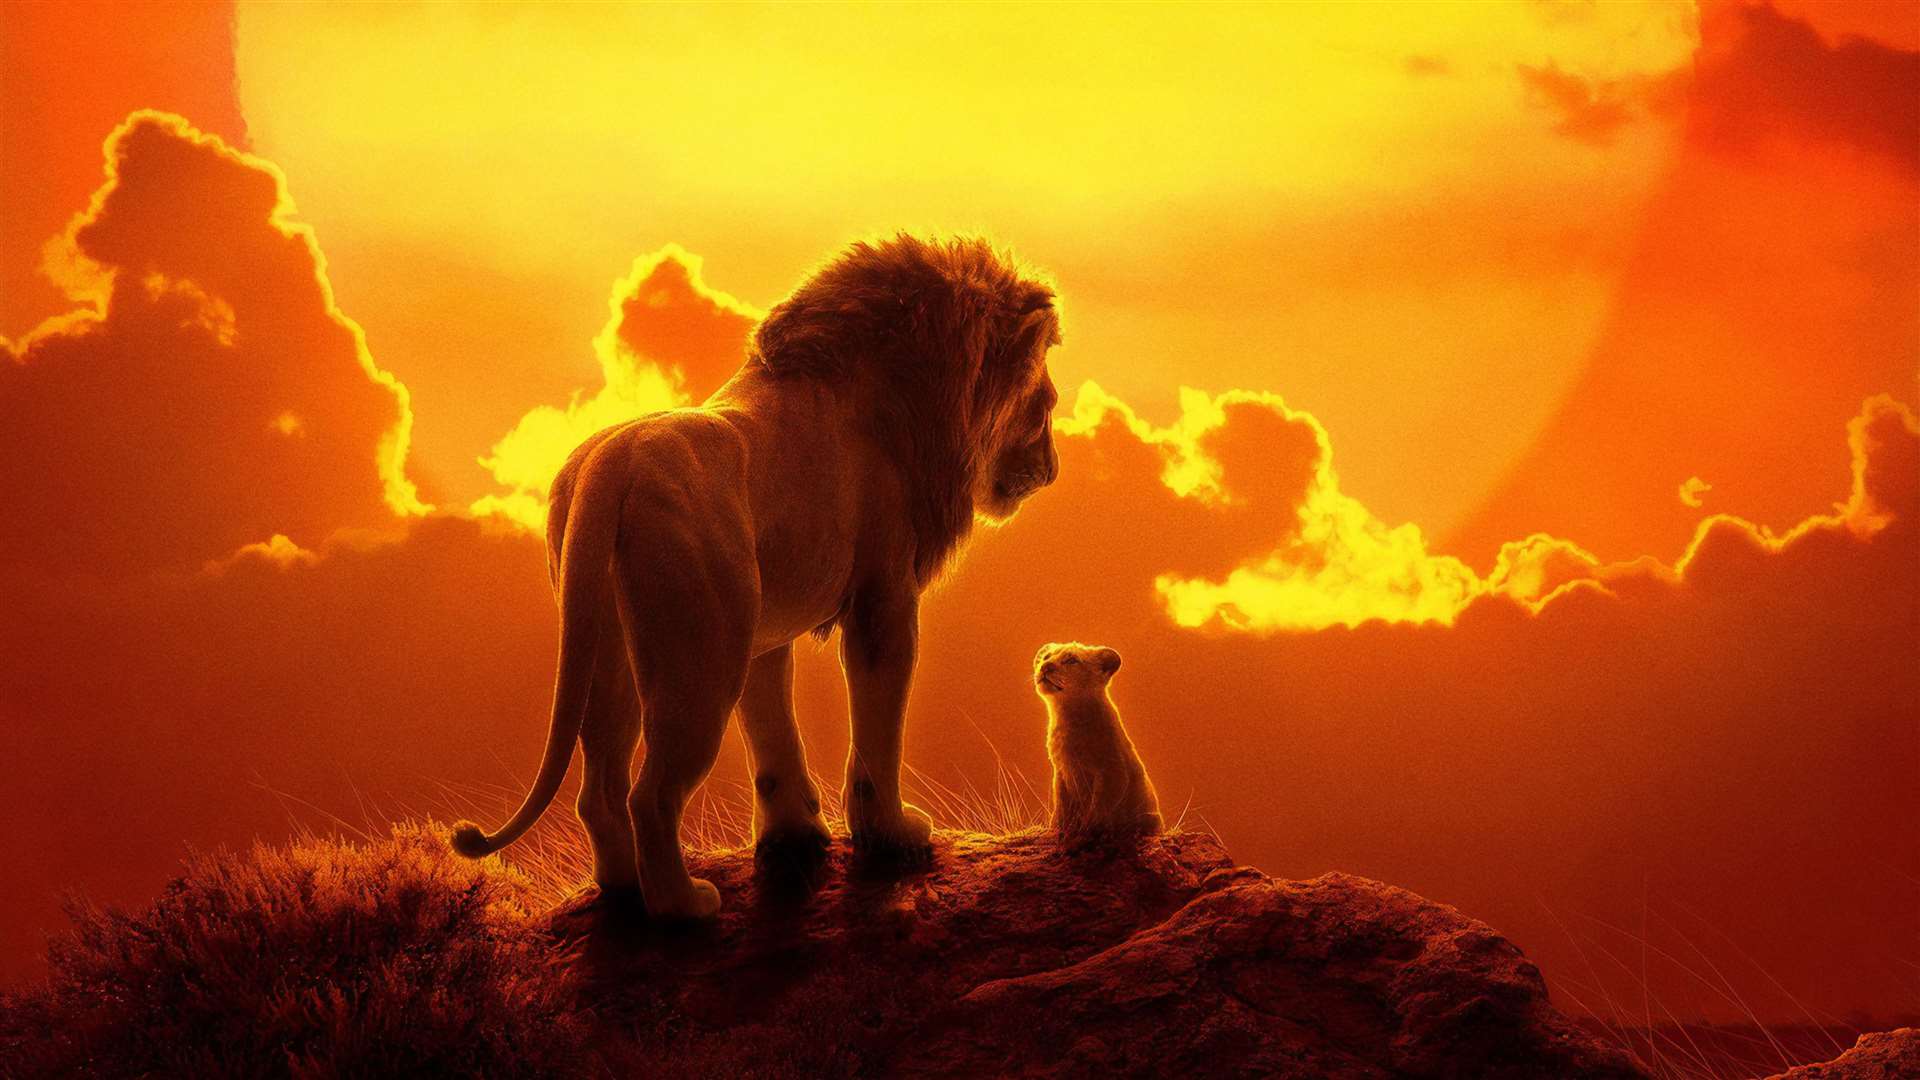 The Lion King is released on July 19